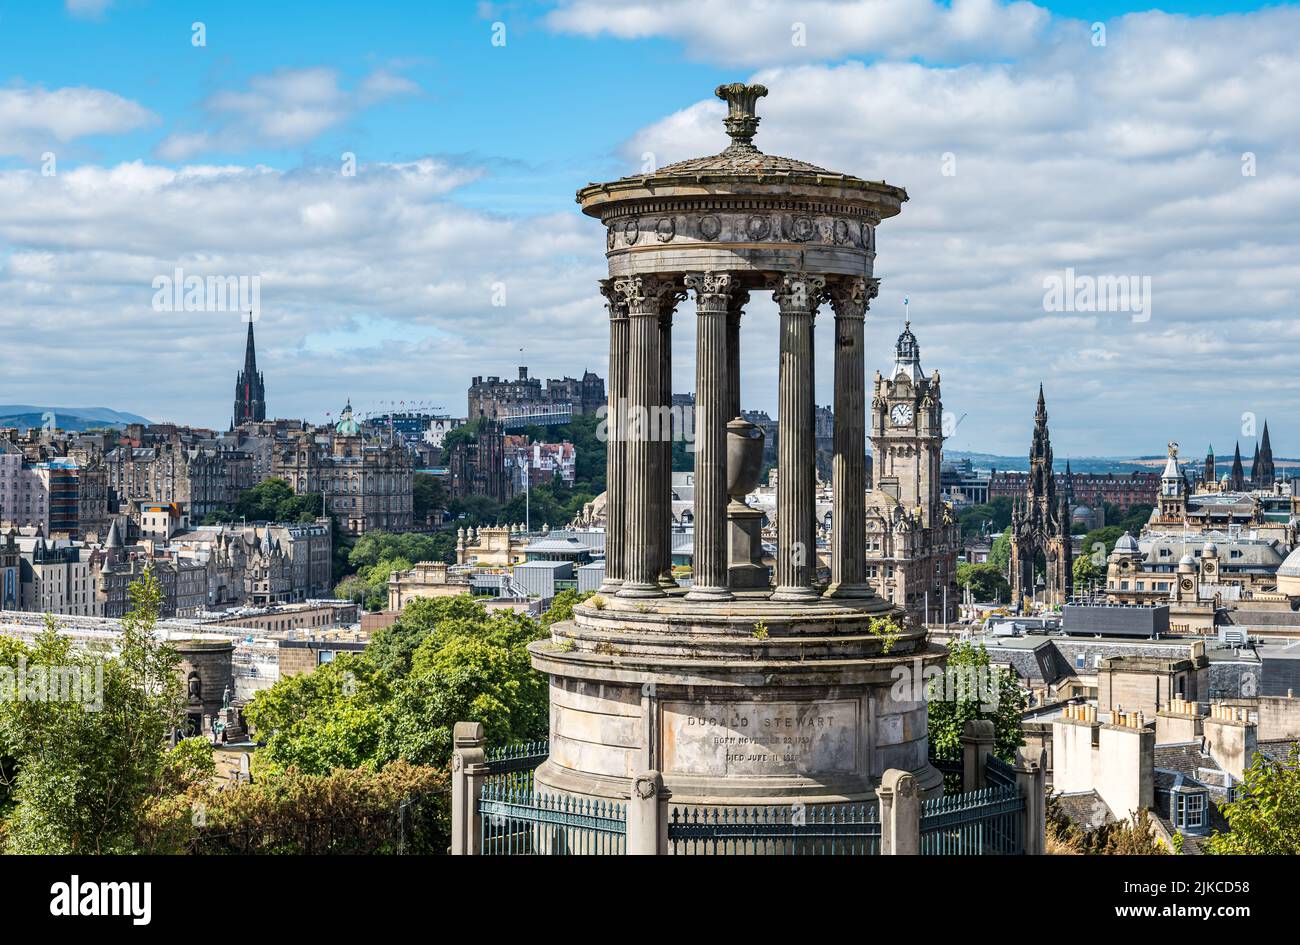 View of Dugald Stewart Monument over city skyline with castle and Balmoral hotel clock, Edinburgh, Scotland, UK Stock Photo